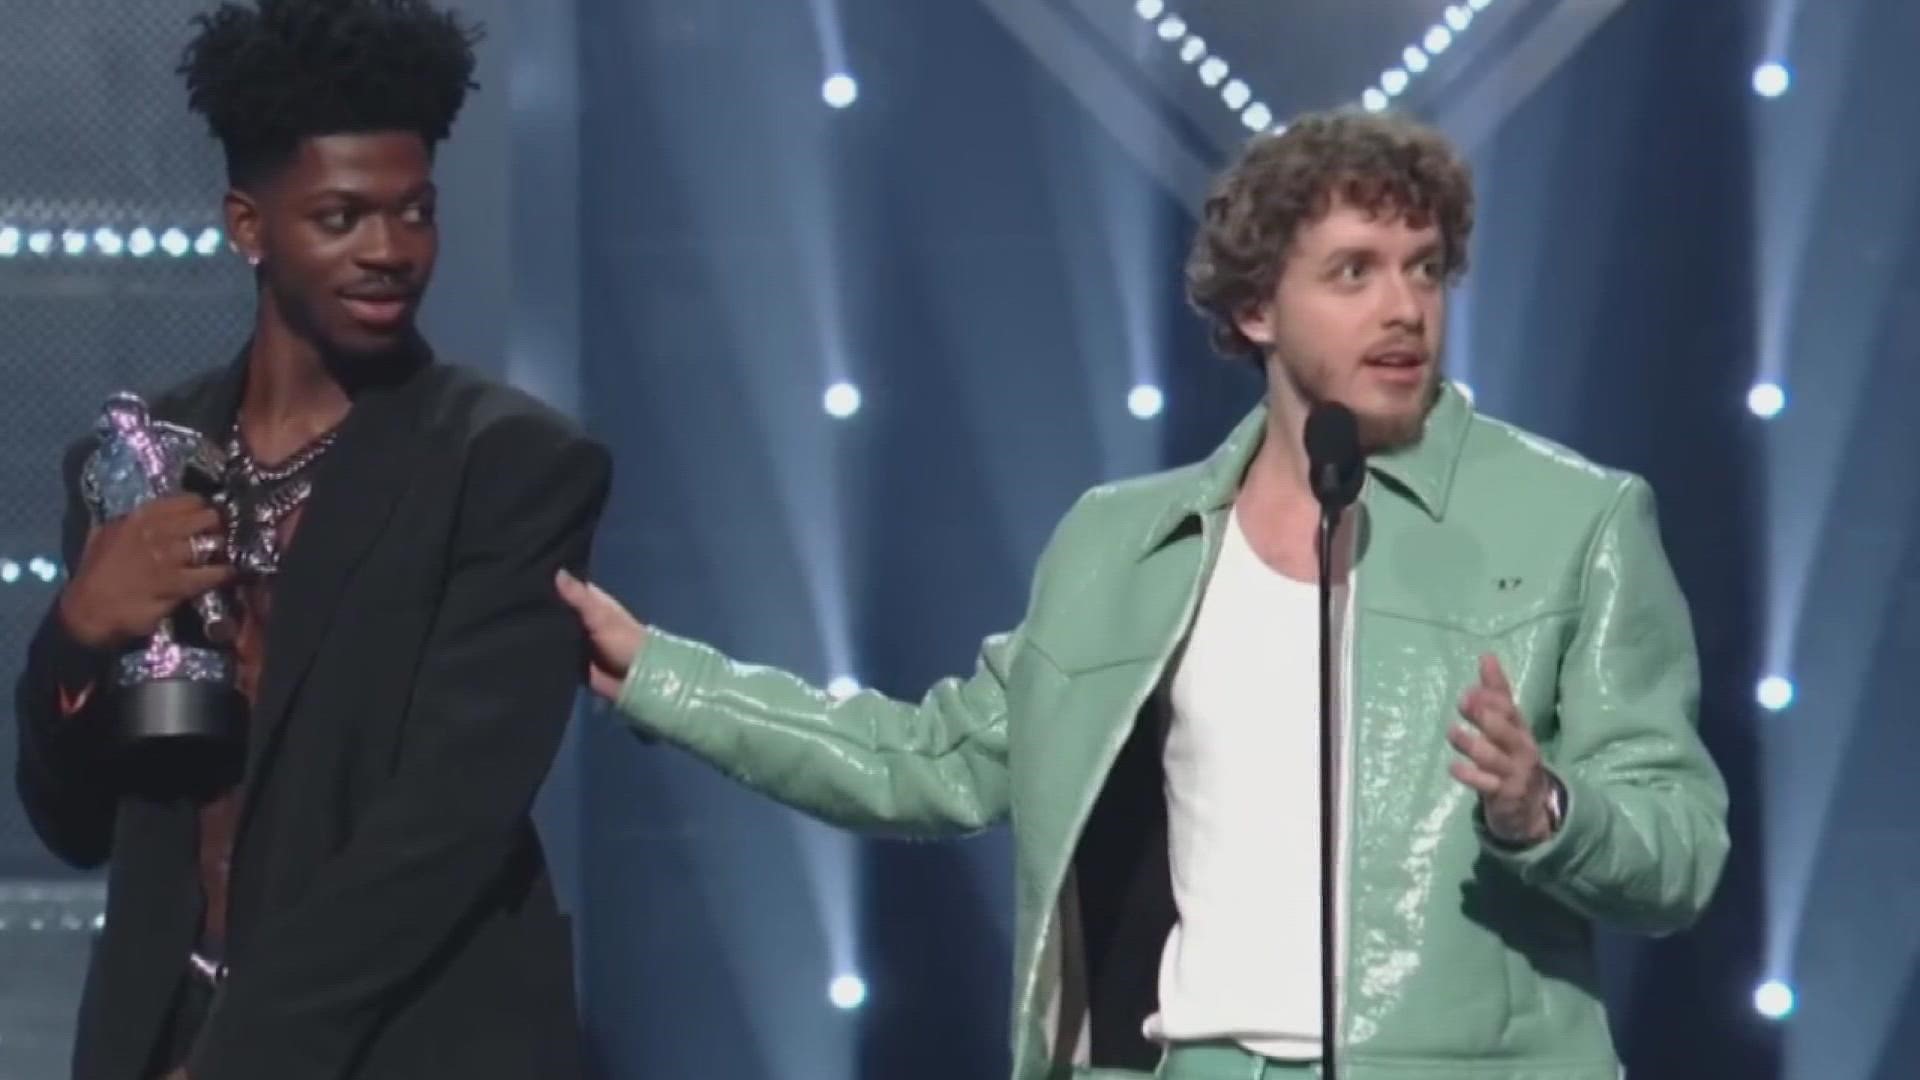 Louisville's own Jack Harlow had the honor of co-hosting the MTV Video Music Awards. He won a total of four VMA awards, including, Best Collaboration with Lil Nas X.